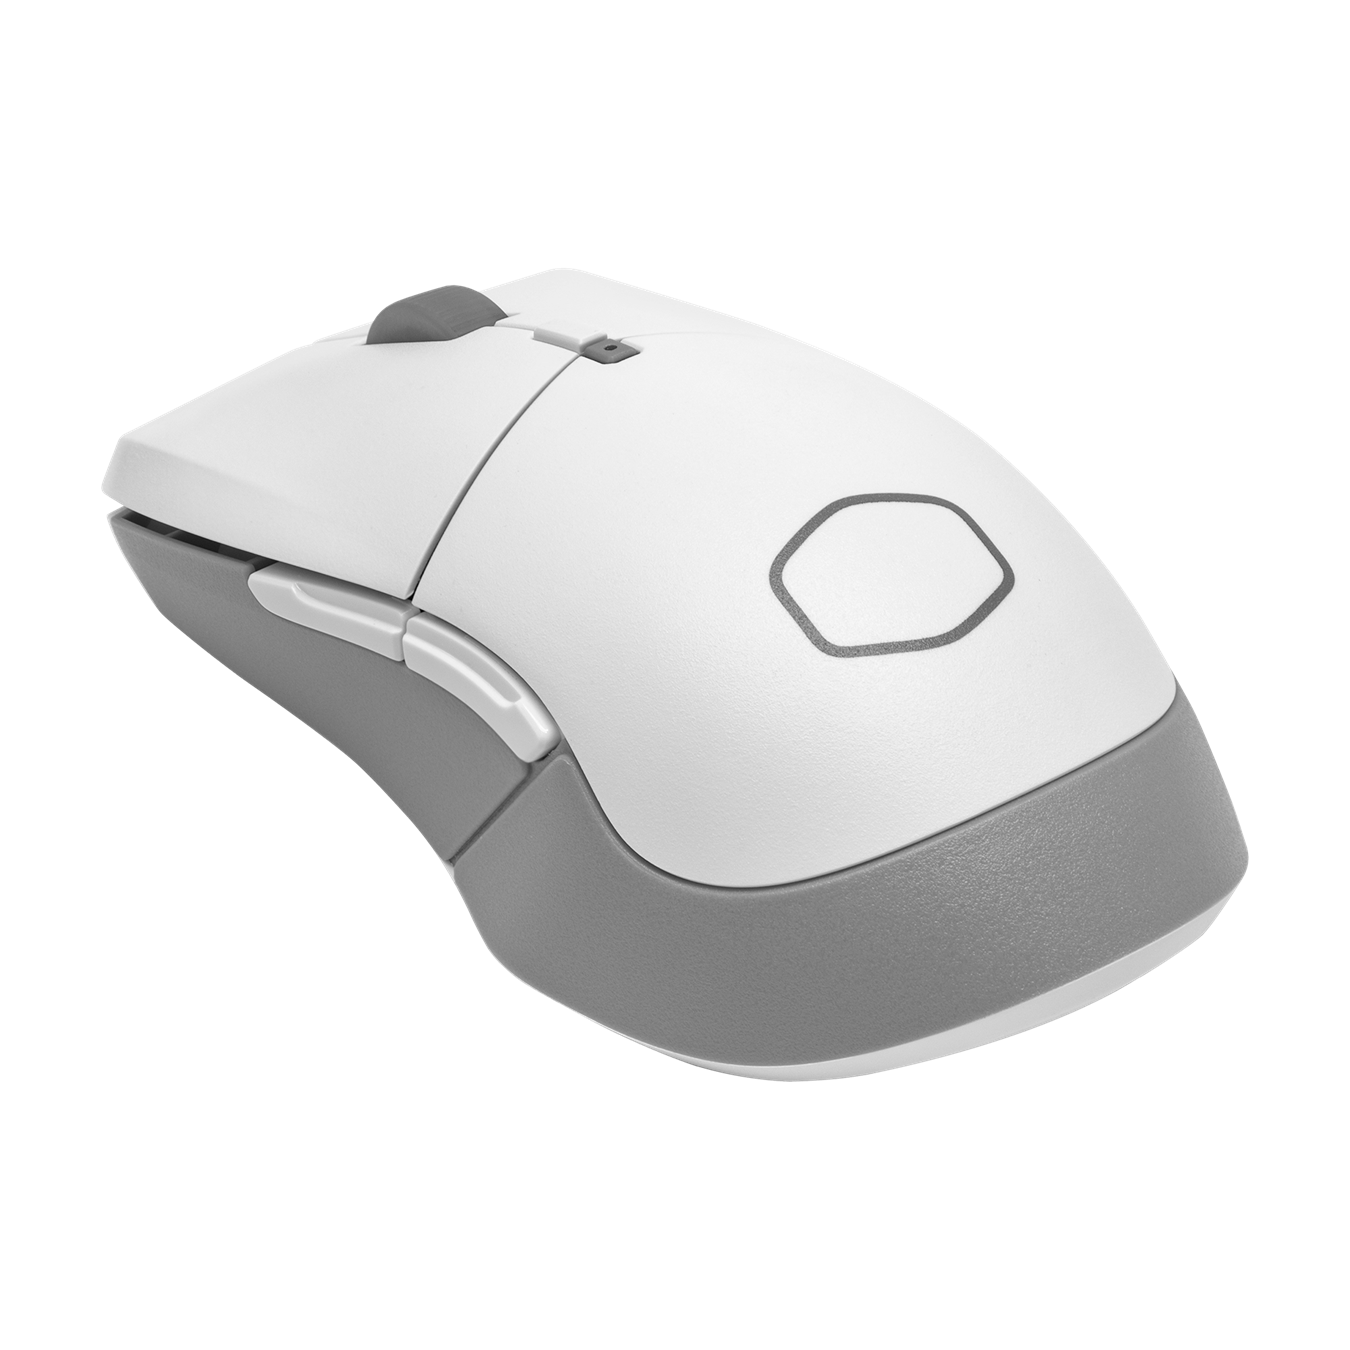 MM311 White Edition Wireless Mouse - Fast, stable transmission with a longer connection distance